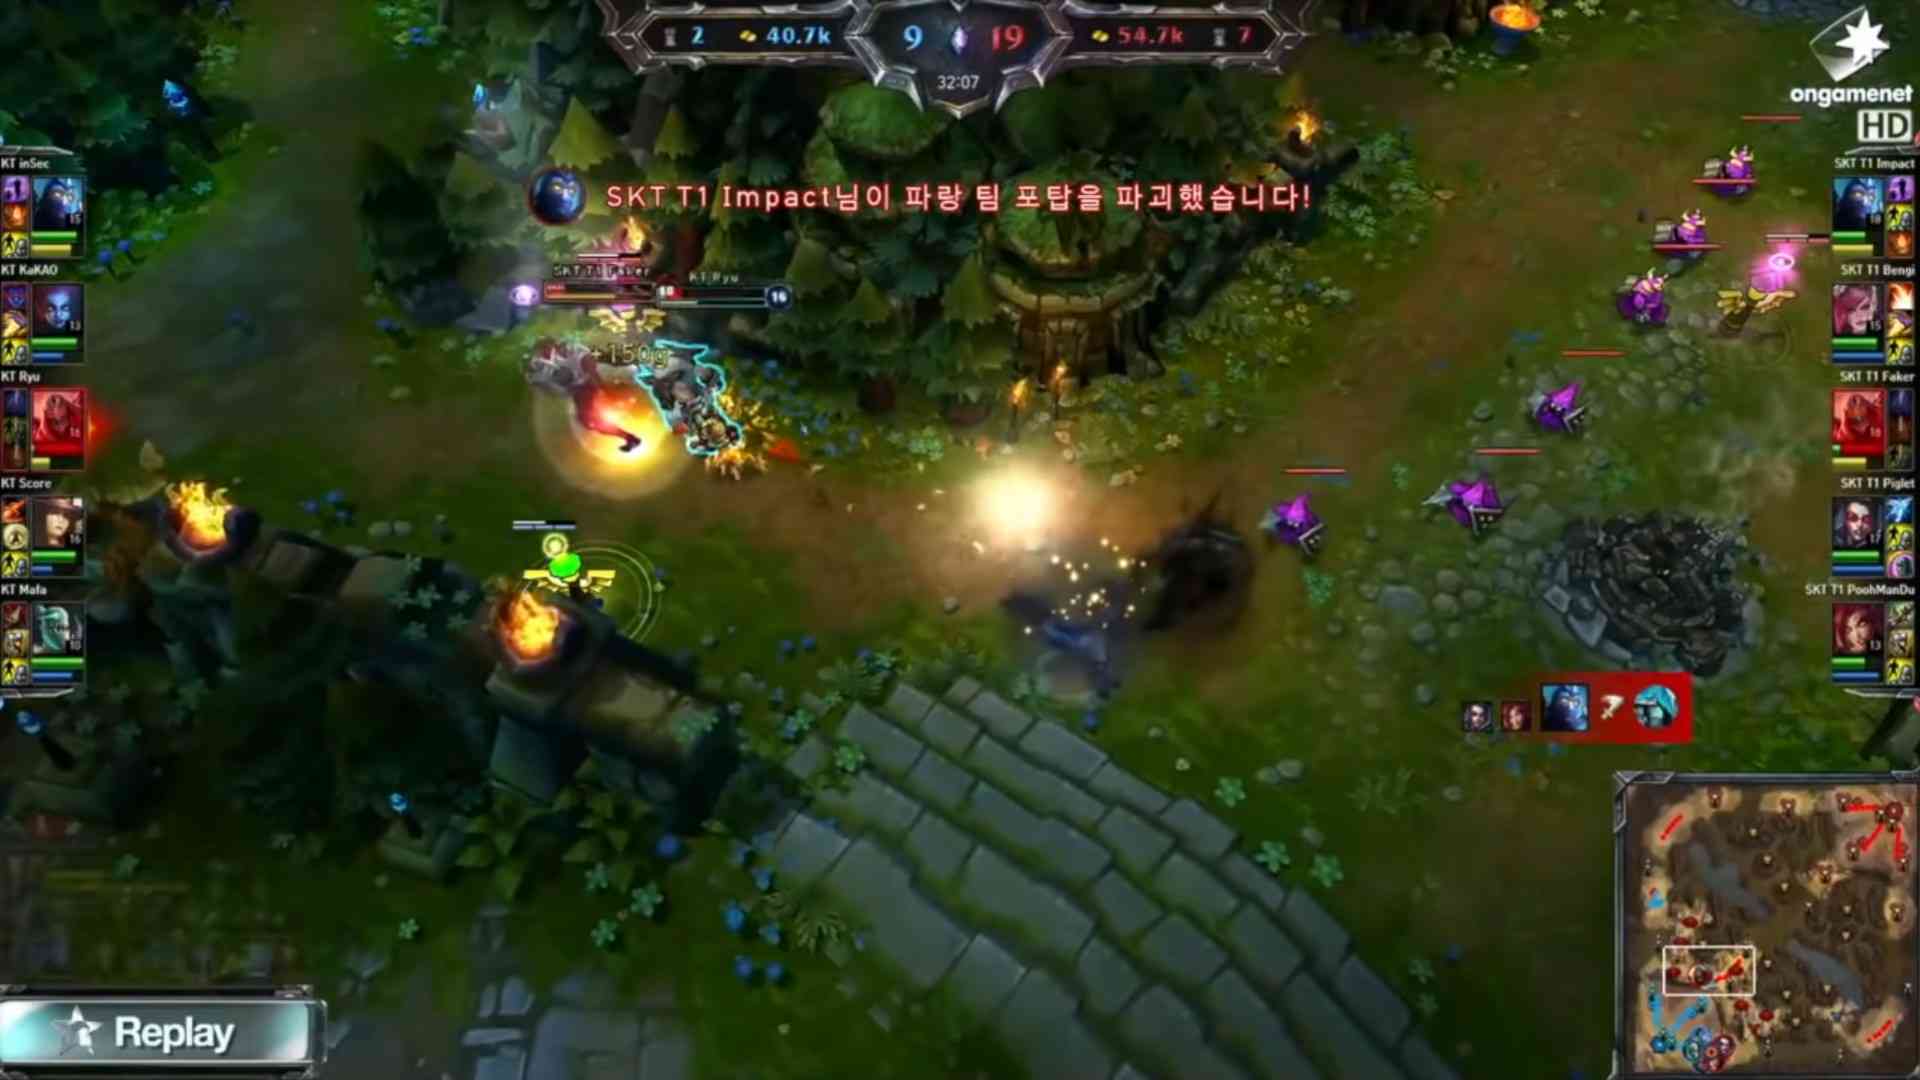 Lee “Faker” Sang-hyeok’s crazy outplay on Ryu “Ryu” Sang-wook was a result of the game five blind picks tradition (Image Credits: LoL Esports/ongamenet).